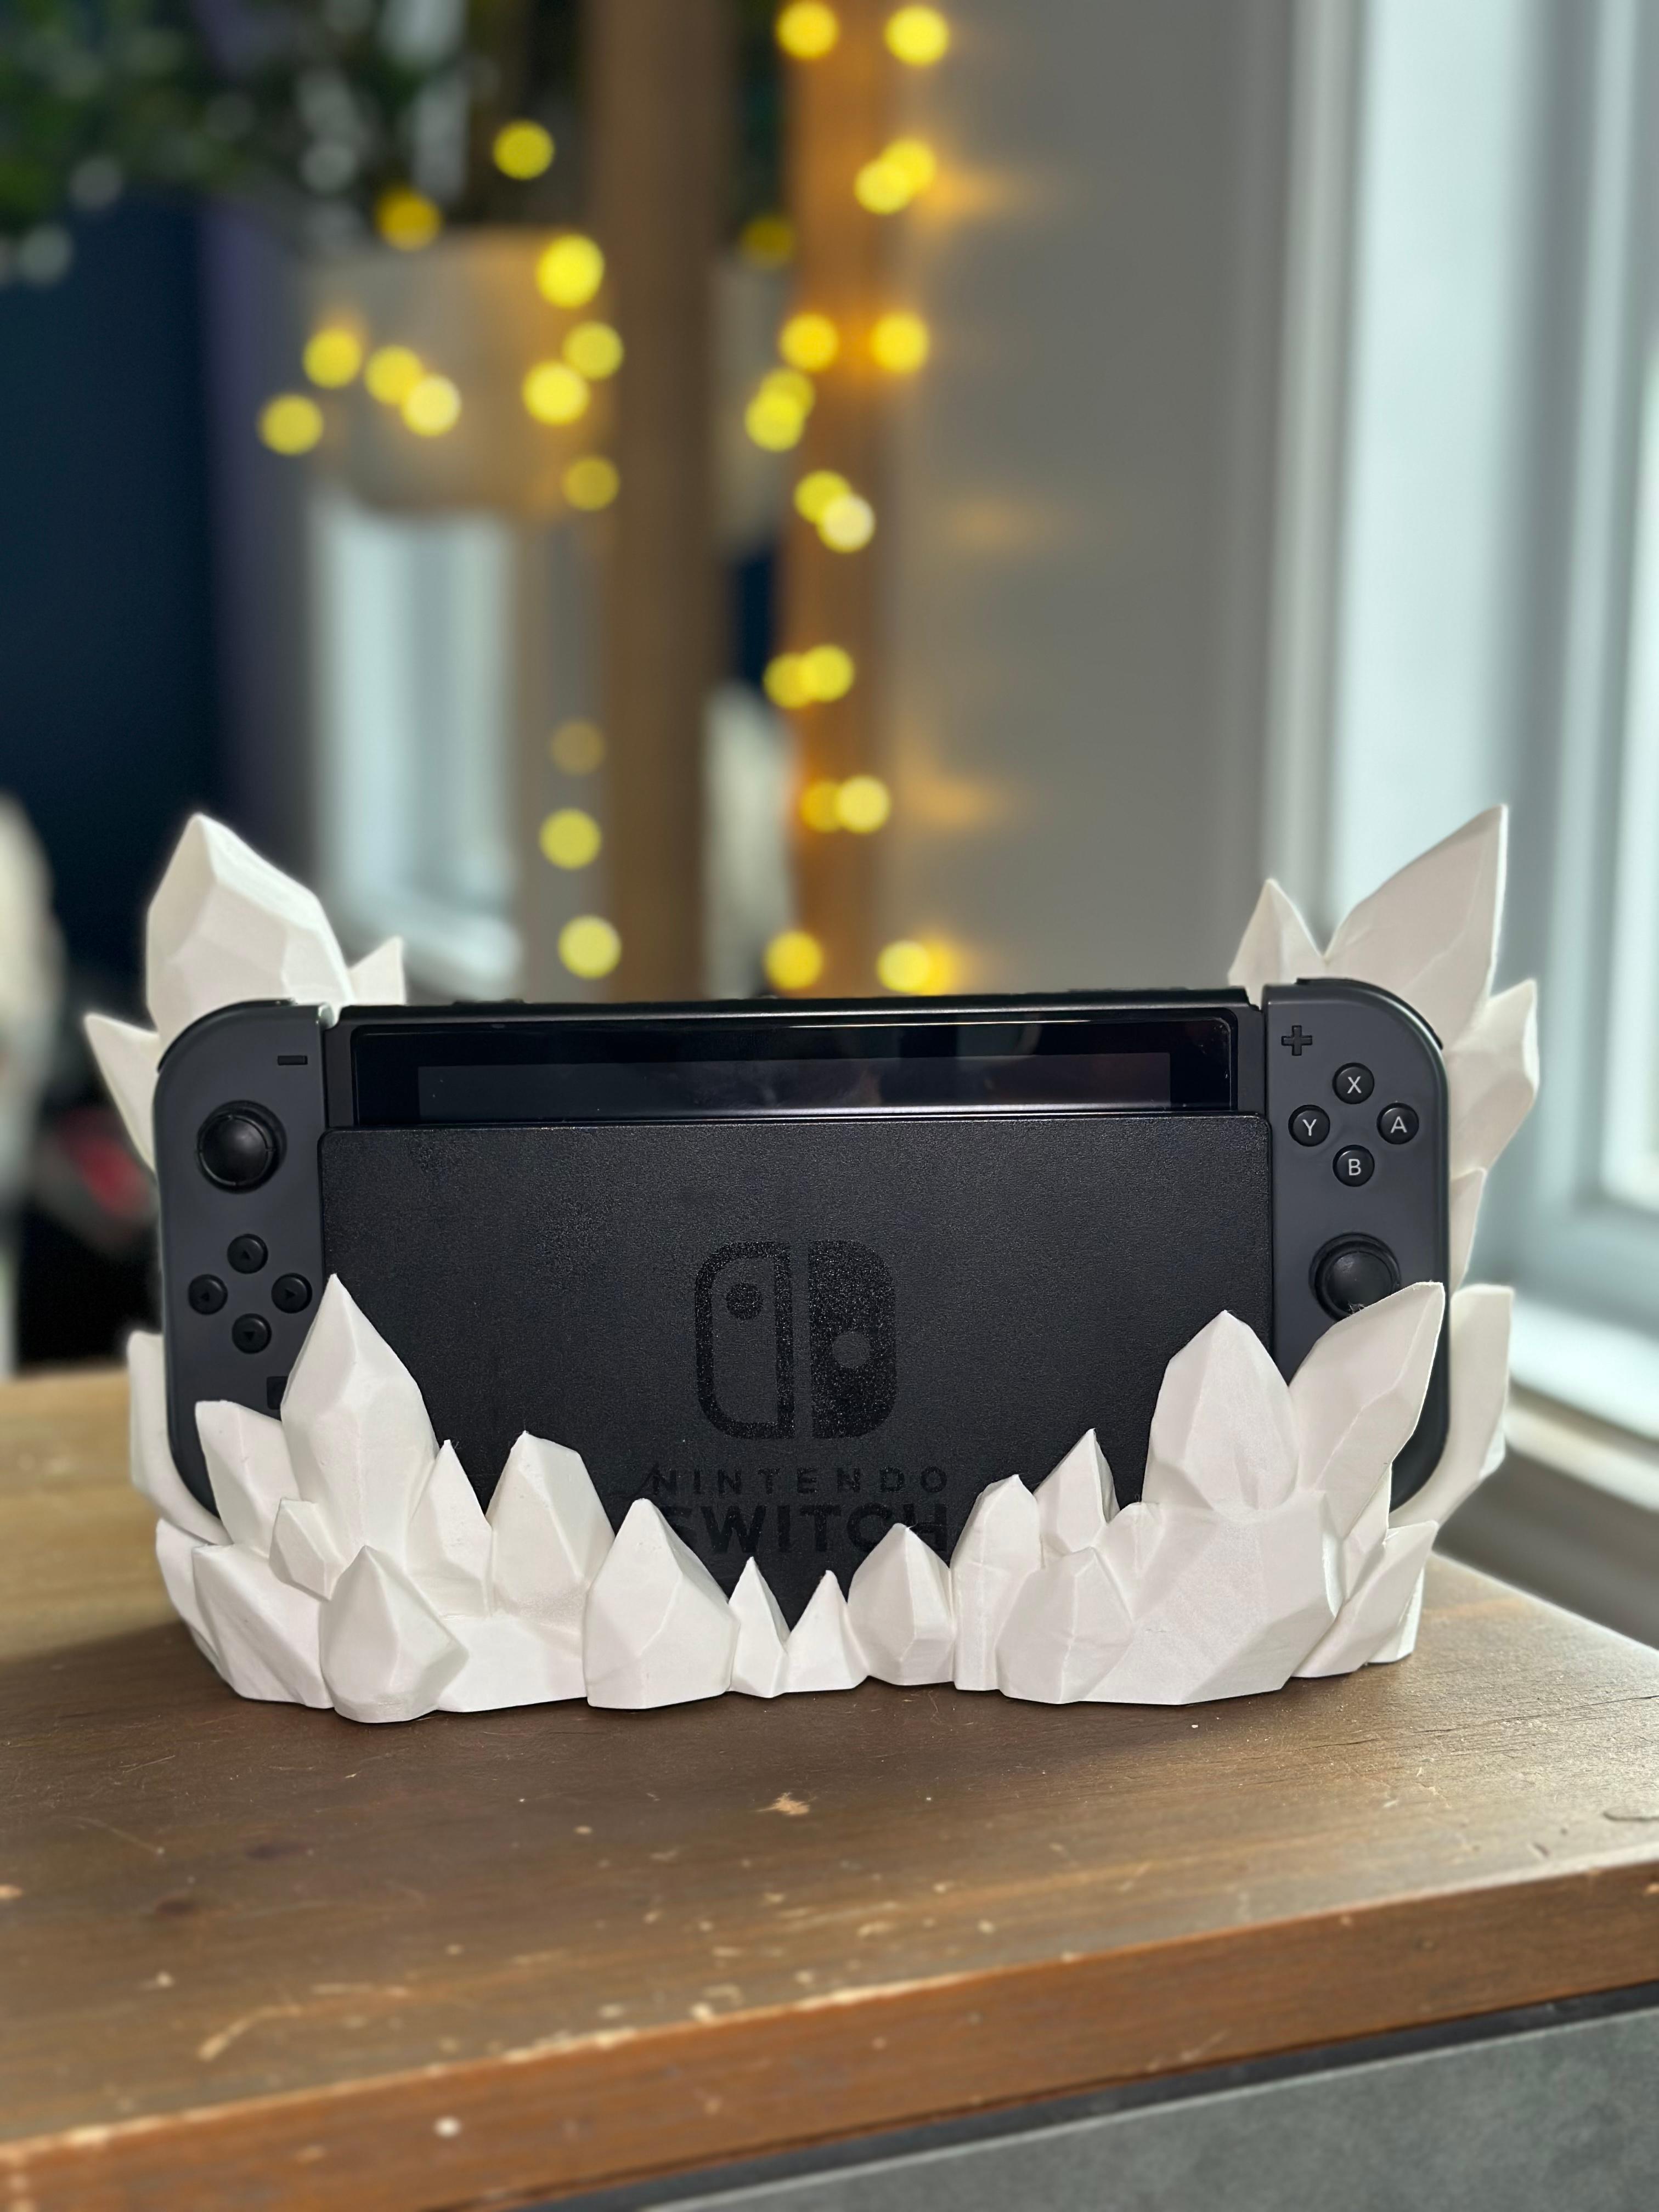 Nintendo Switch Crystal Dock - Classic and OLED Version 3d model